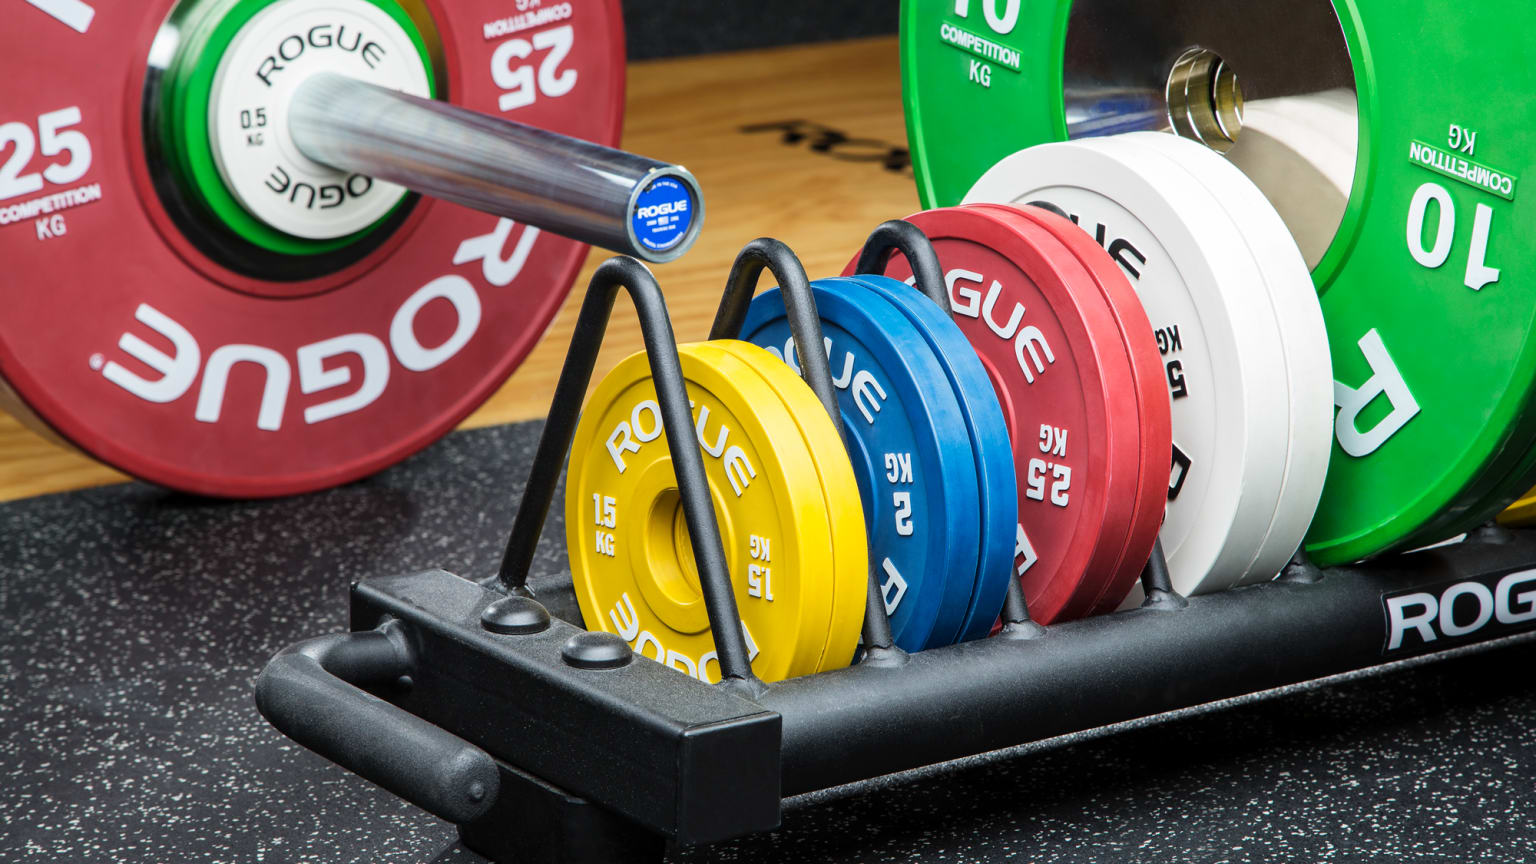 Rogue KG Plates (IWF) | Rogue Fitness Europe